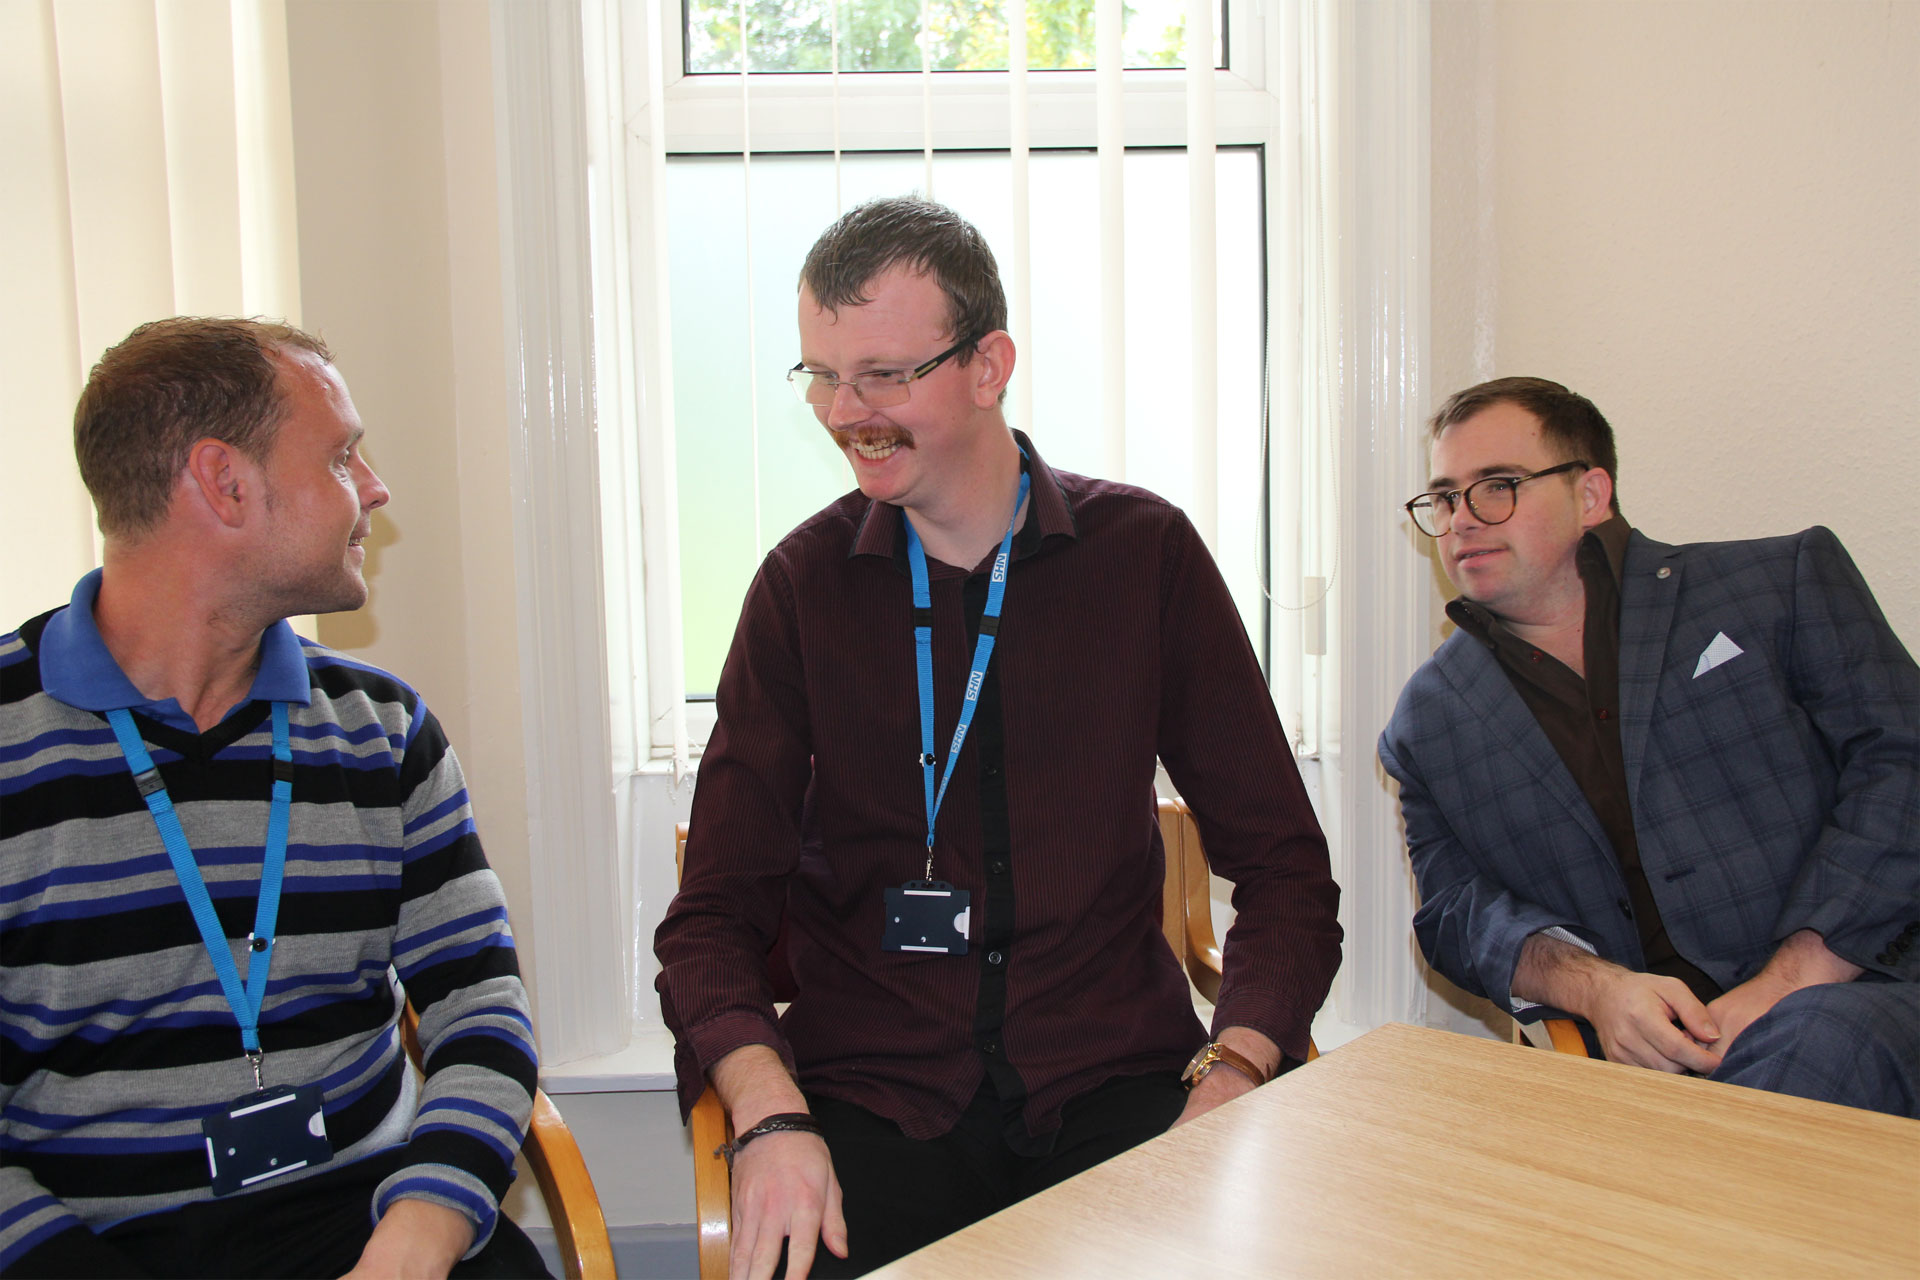 three-learning-disabilities-colleagues-sitting-talking-smiling.JPG